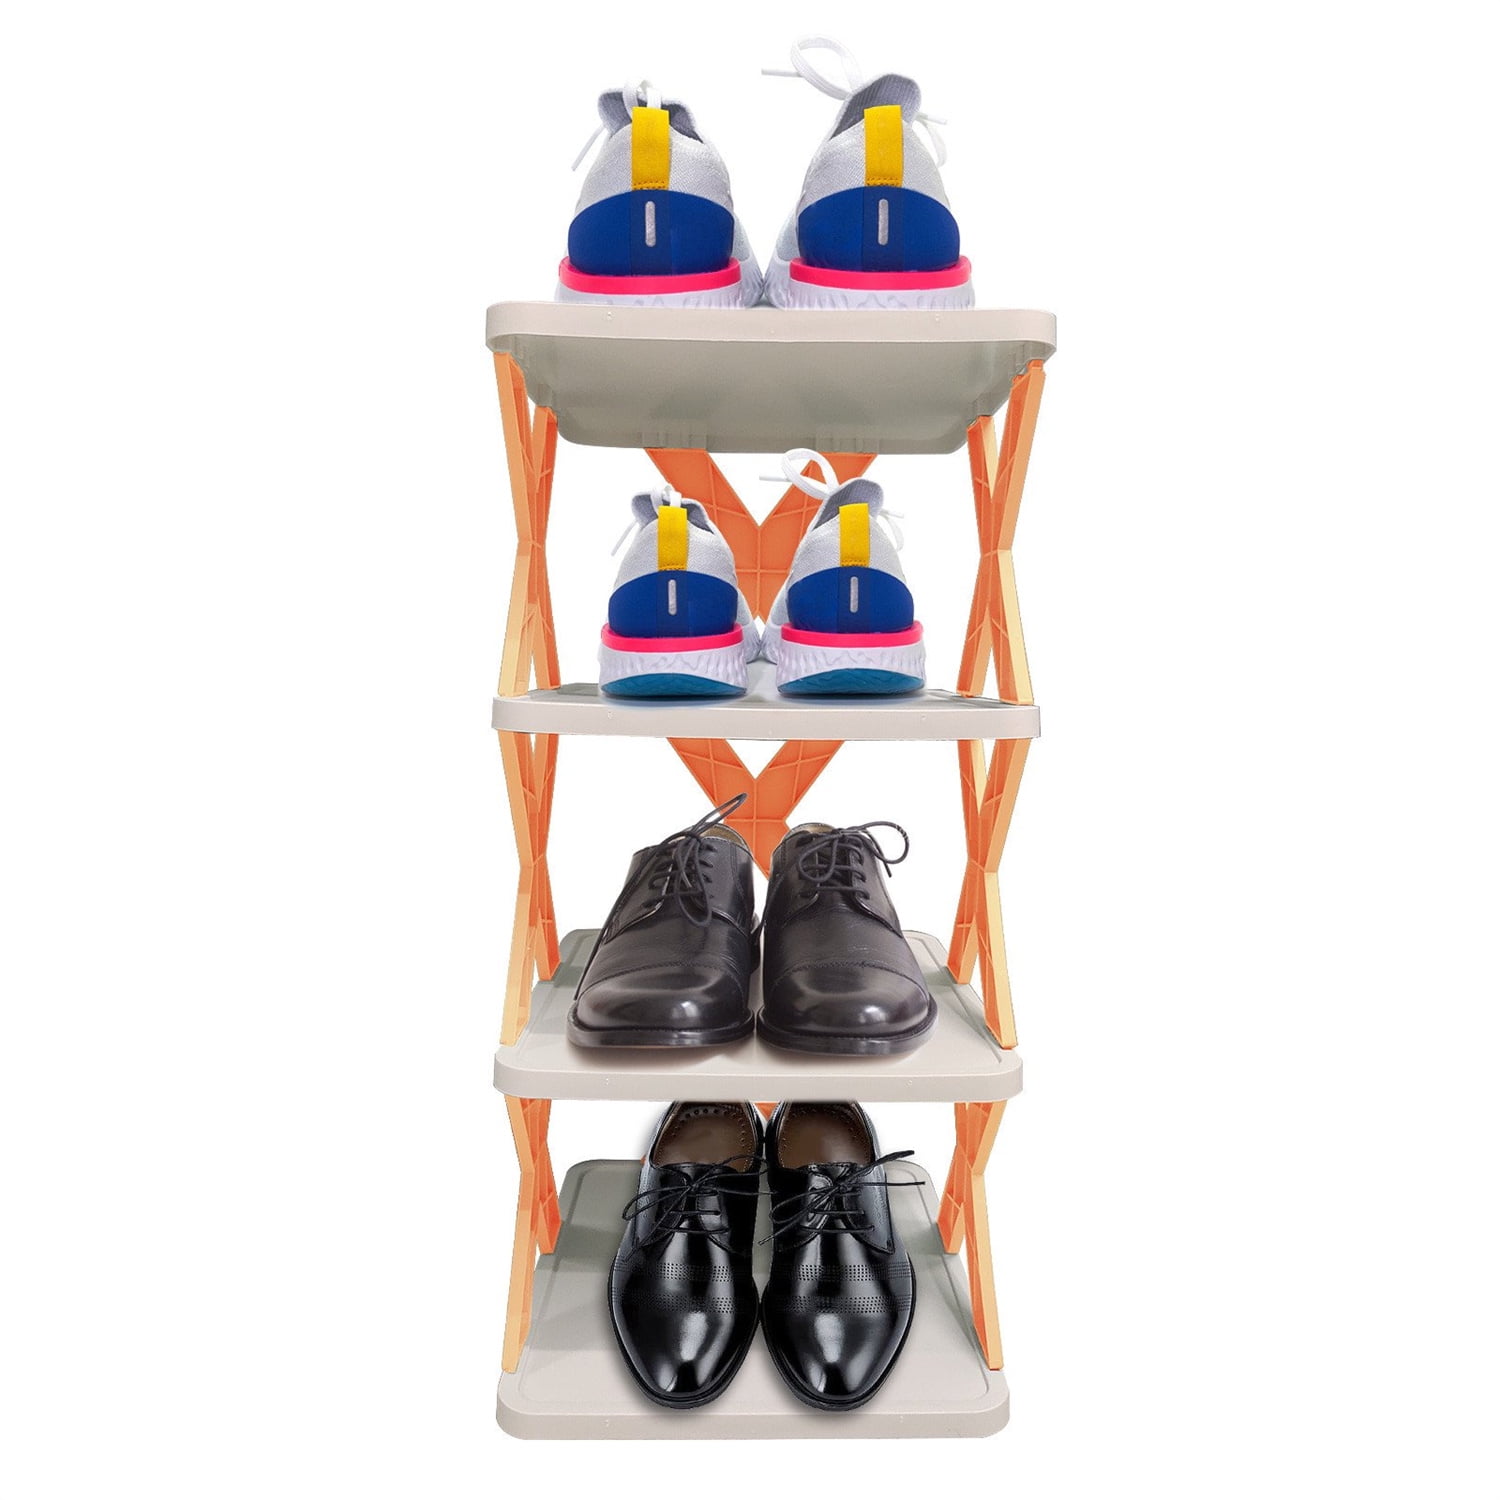 LAIGOO Small Shoe Rack for Closet/Entryway/Hallway, 17.7 inch, 4-Tier Shoe  Organizer Vertical,8 Pair Shoe Storage Shelf for Small Spaces (1 Pack